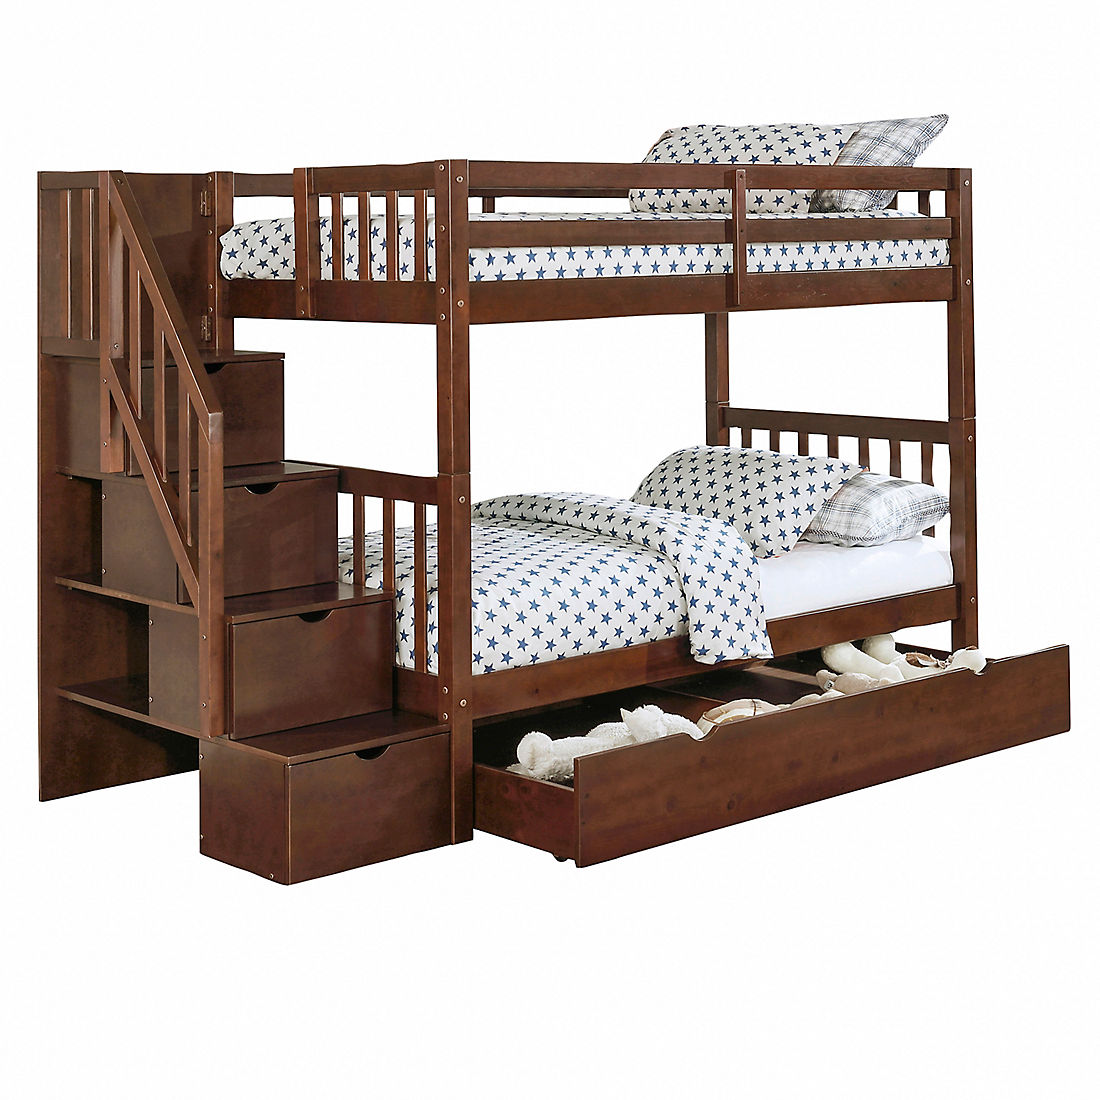 Berkley Jensen Twin Over Stairway, How Much Weight Can A Full Size Bunk Bed Hold